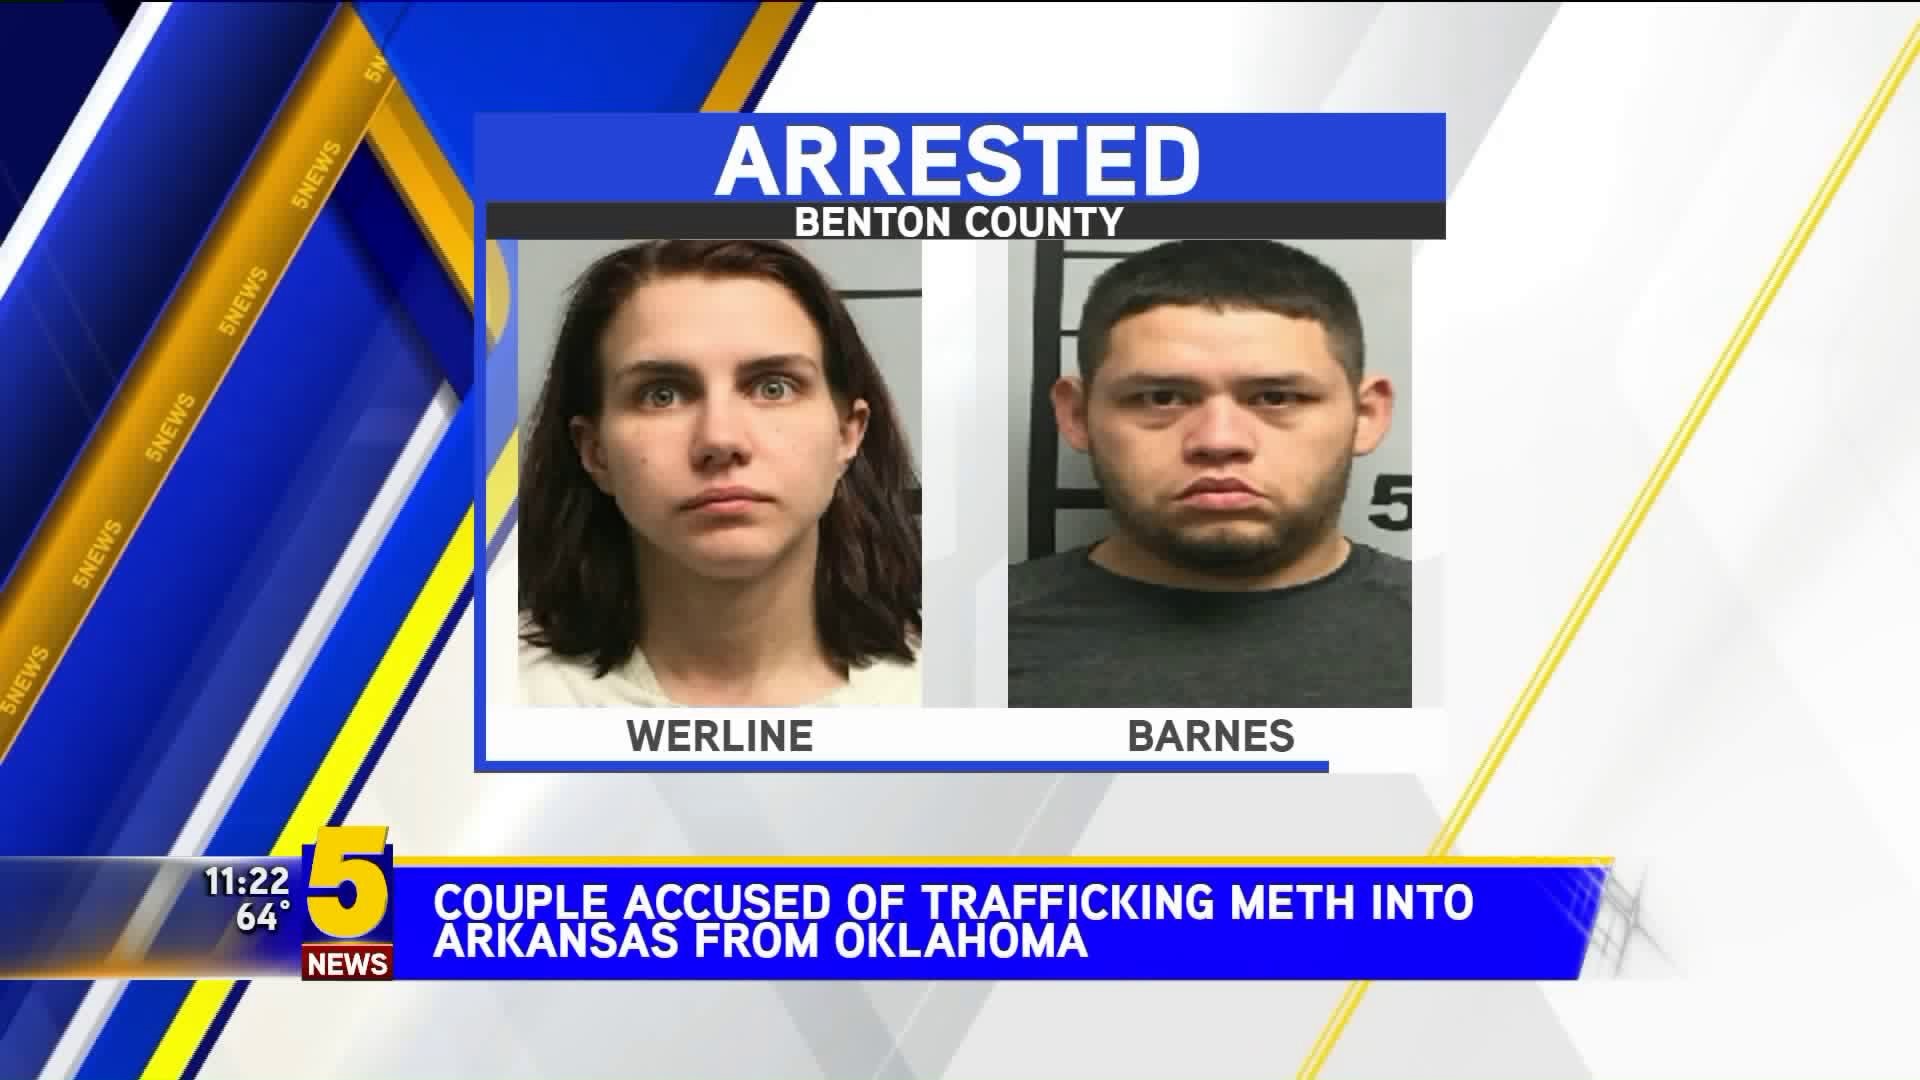 Couple Accussed Of Trafficking Meth Into Arkansas From Oklahoma